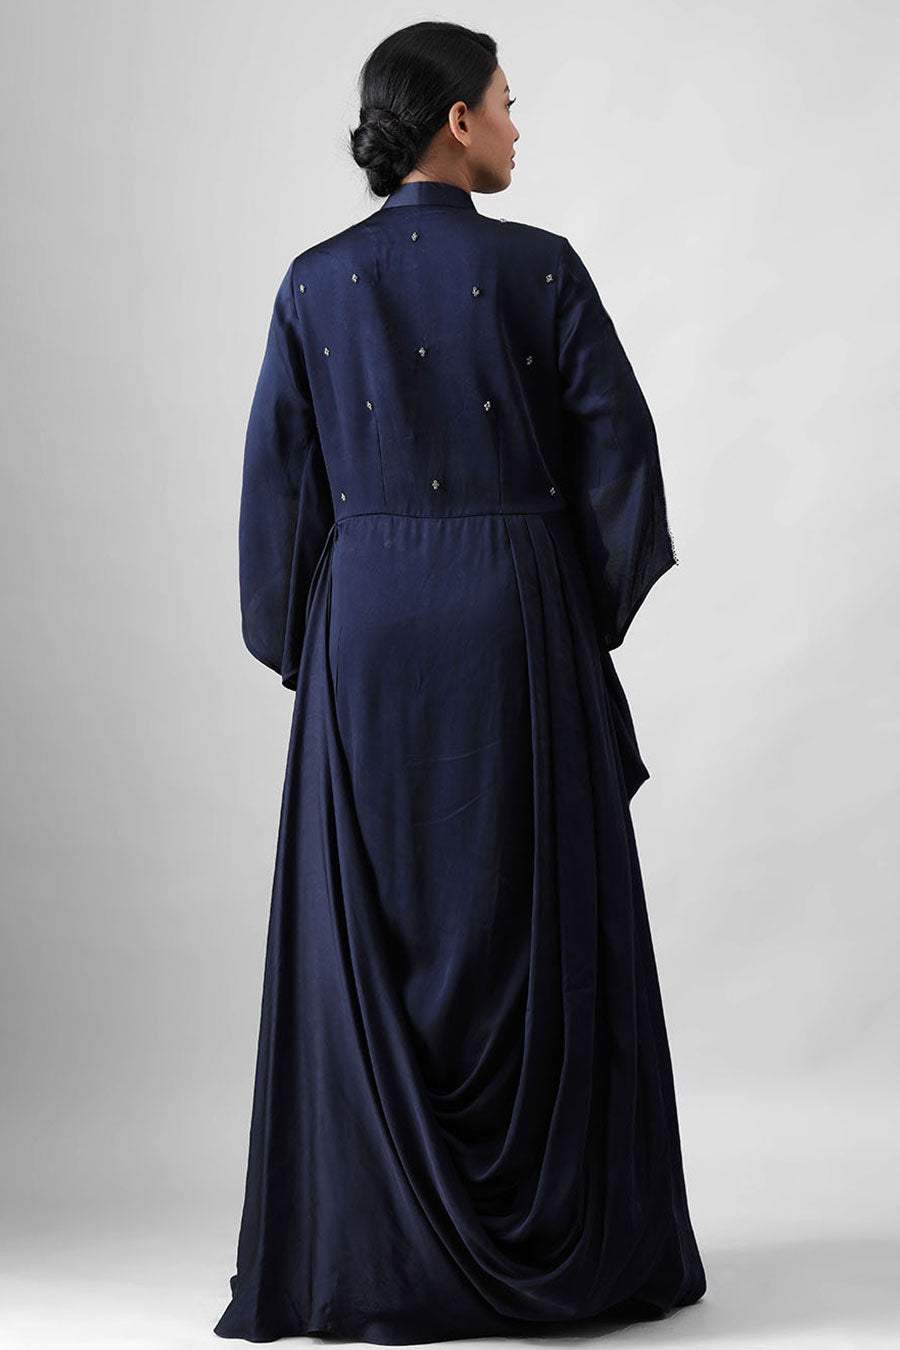 Navy Blue Embroidered Pleated Gown